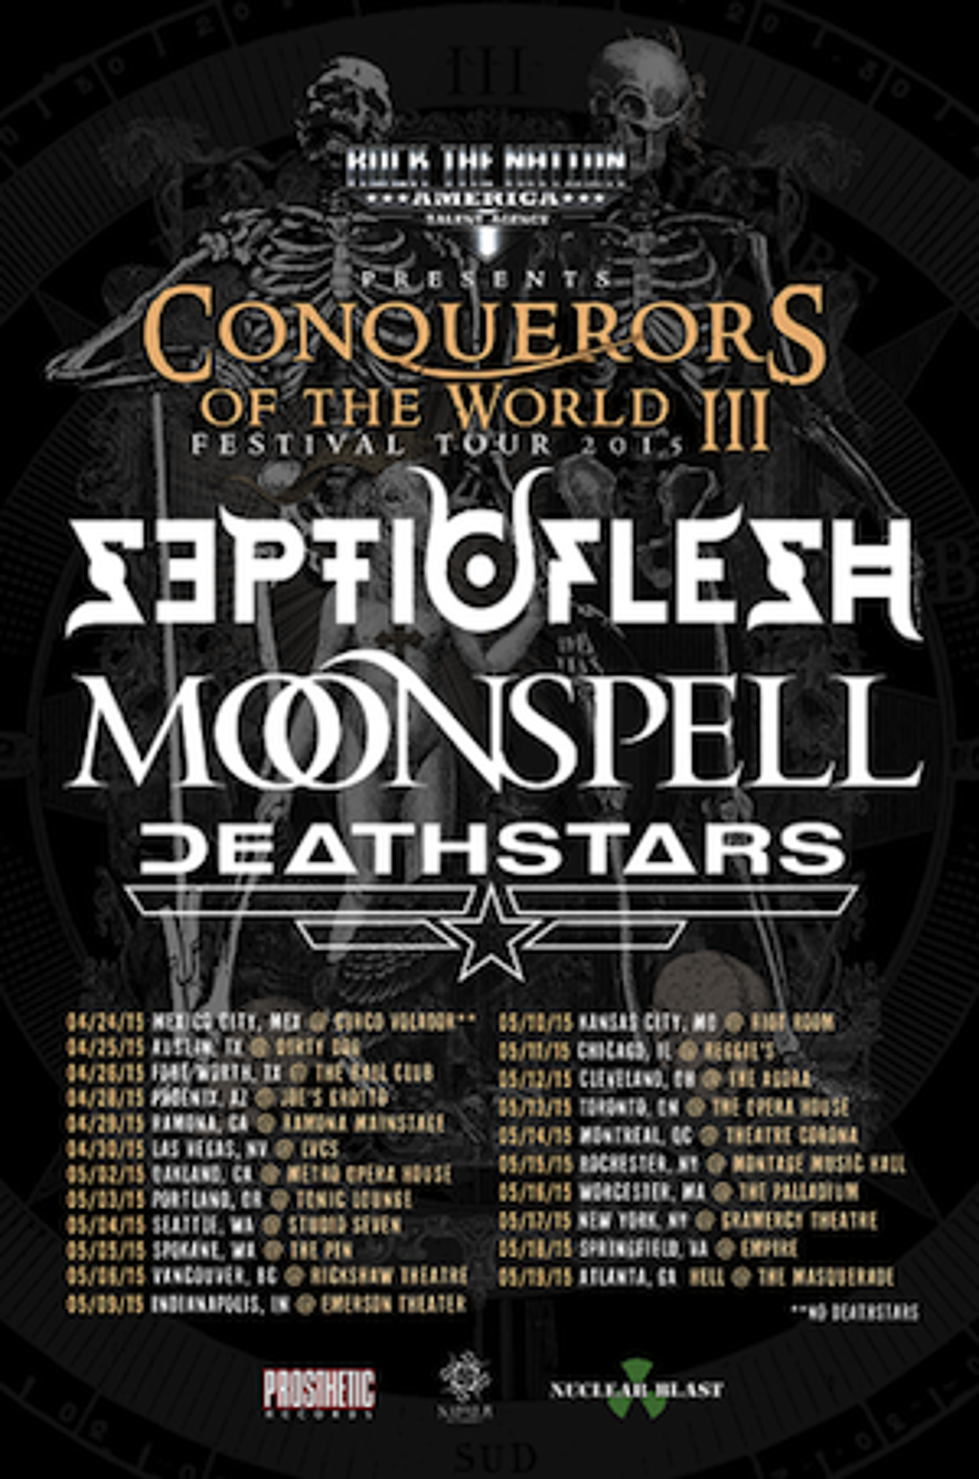 Septicflesh Set to Conquer North America on Tour With Moonspell + Deathstars